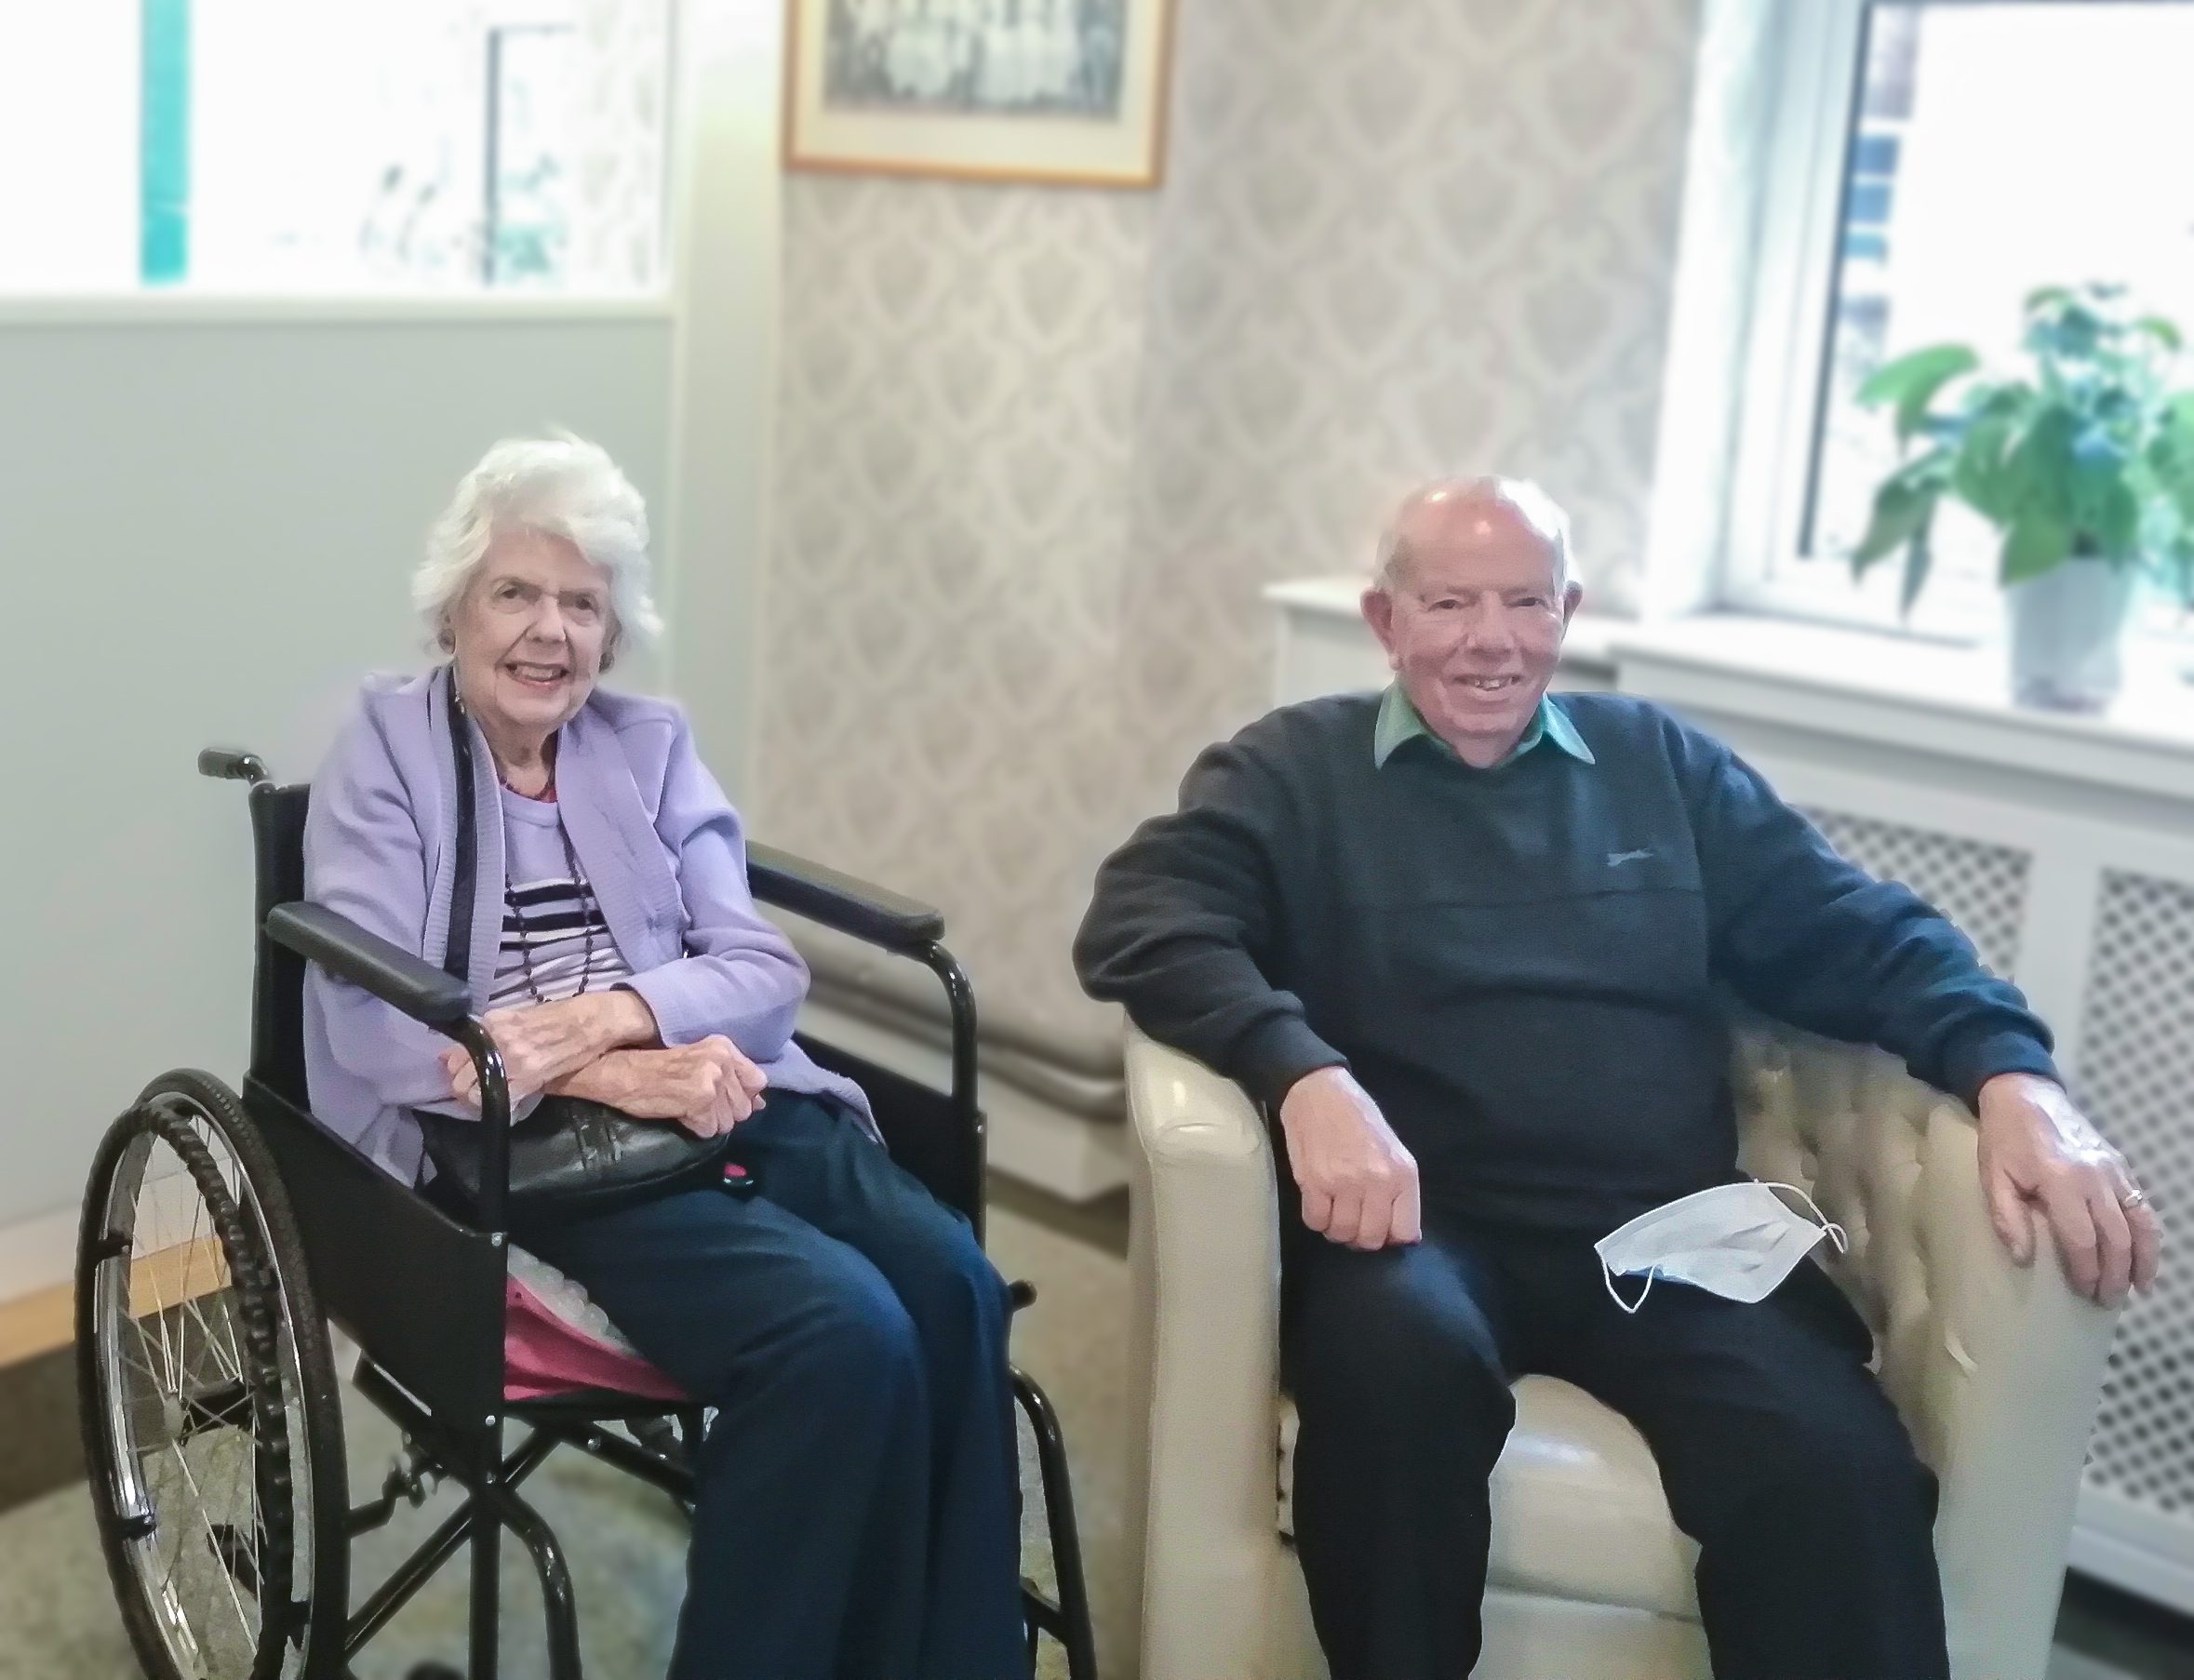 George, who used to be a milk boy at RNNH, visiting his friend Janine, who was on a respite break at the care home. 